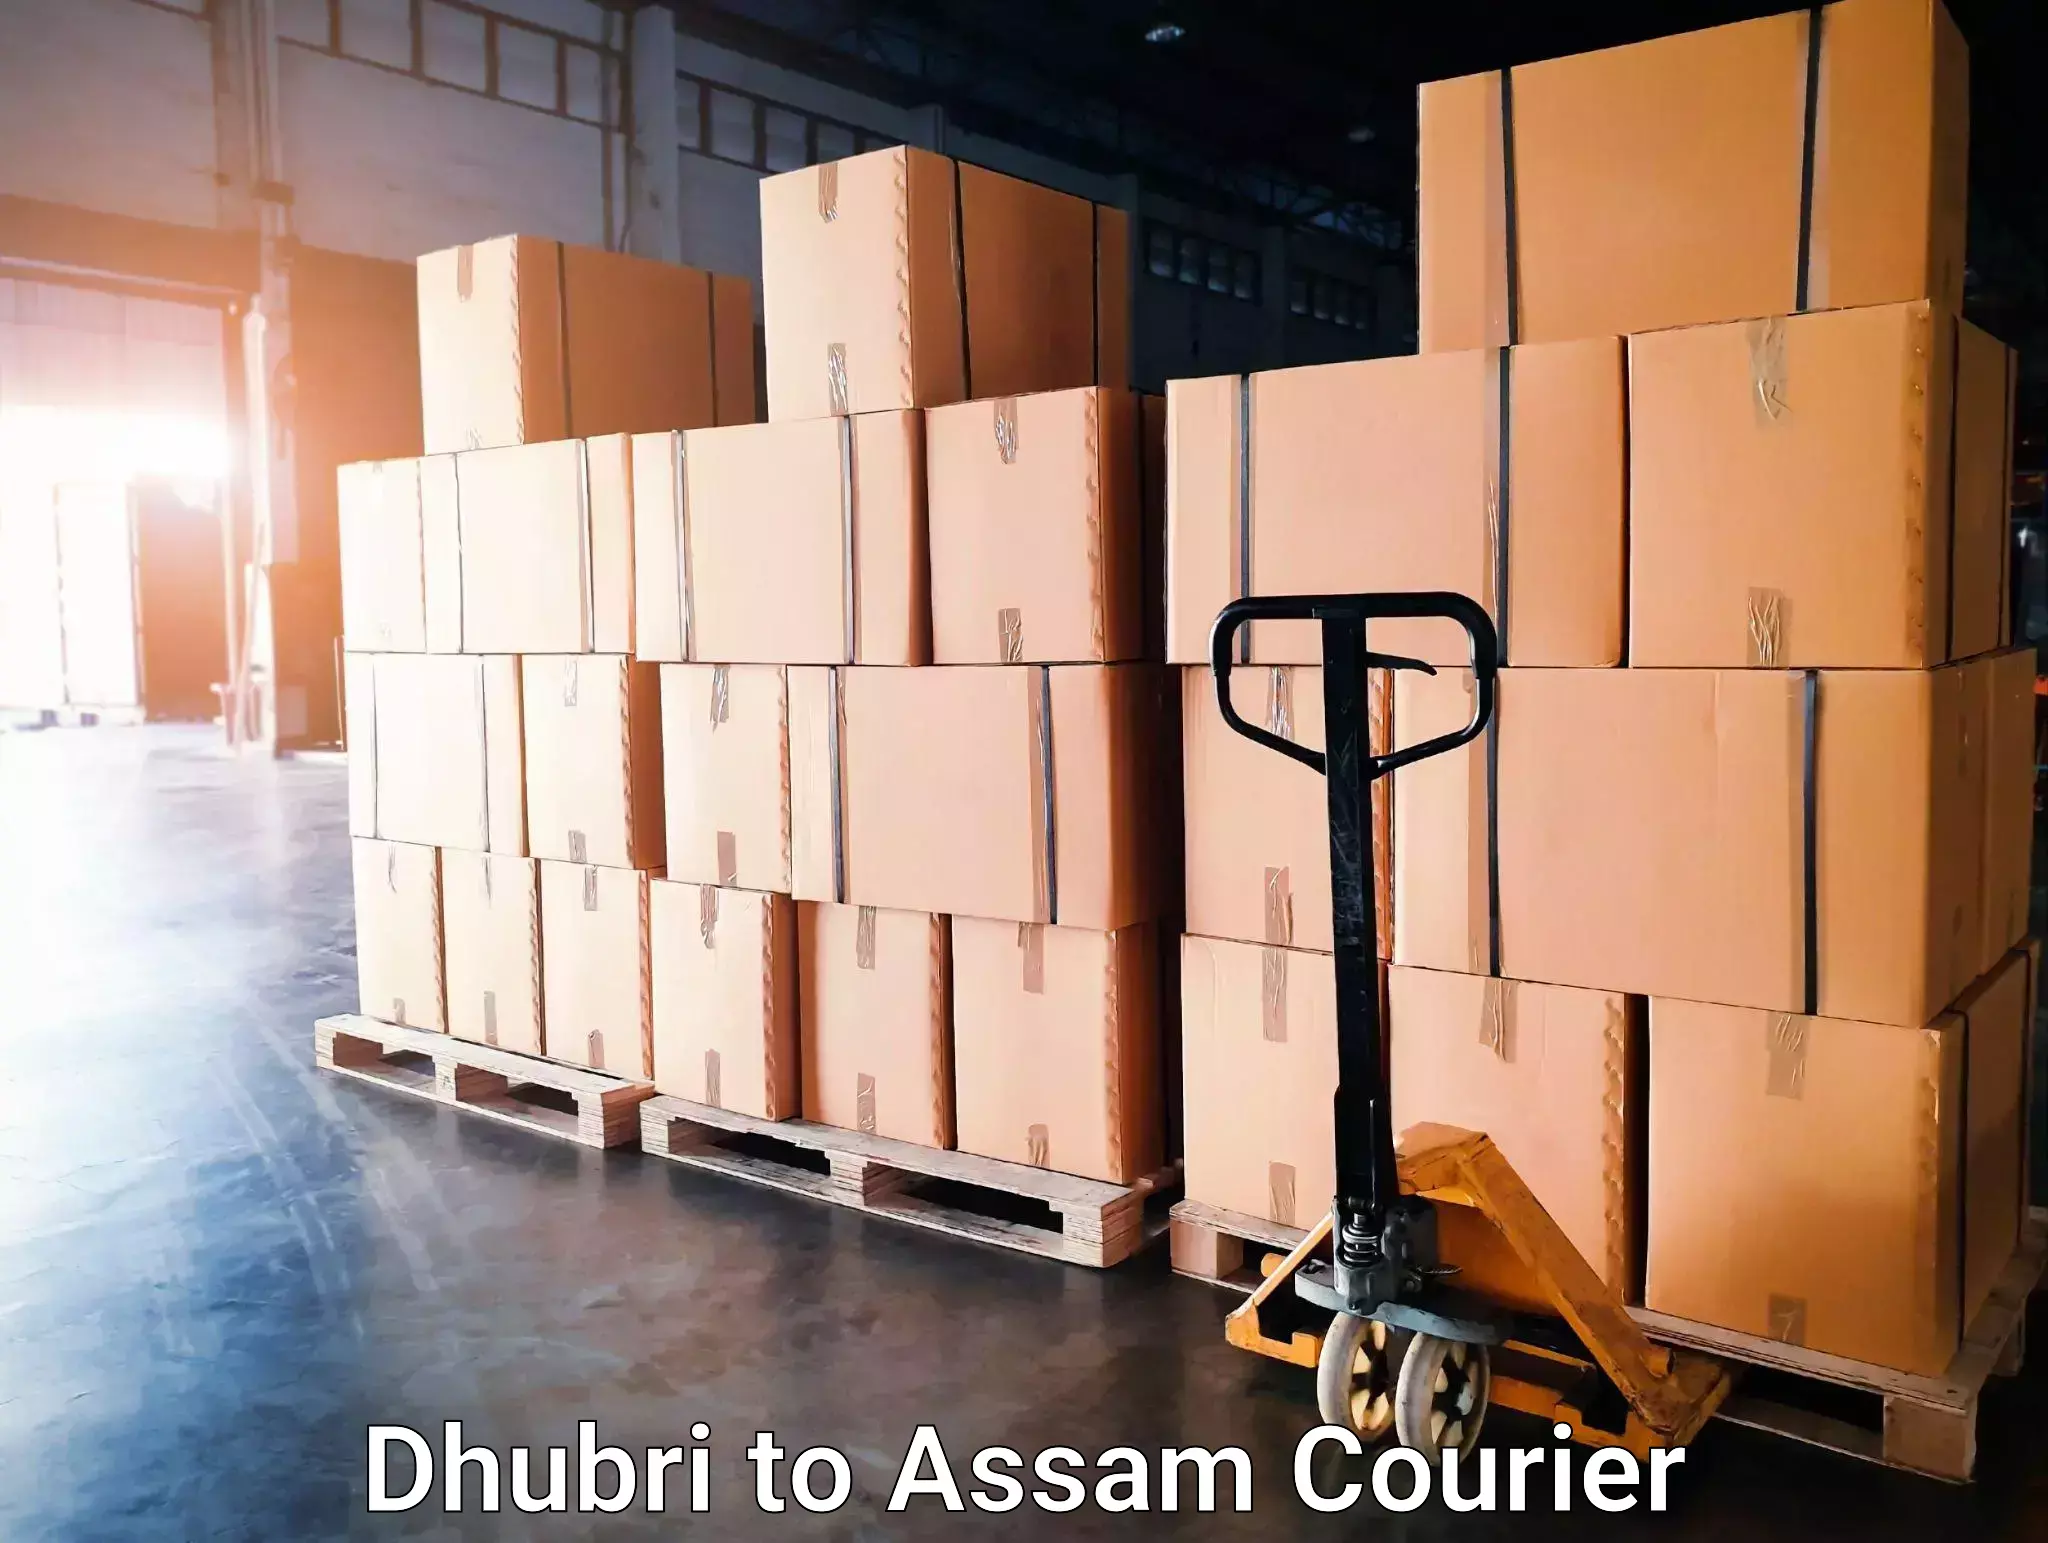 Package delivery network Dhubri to Tezpur